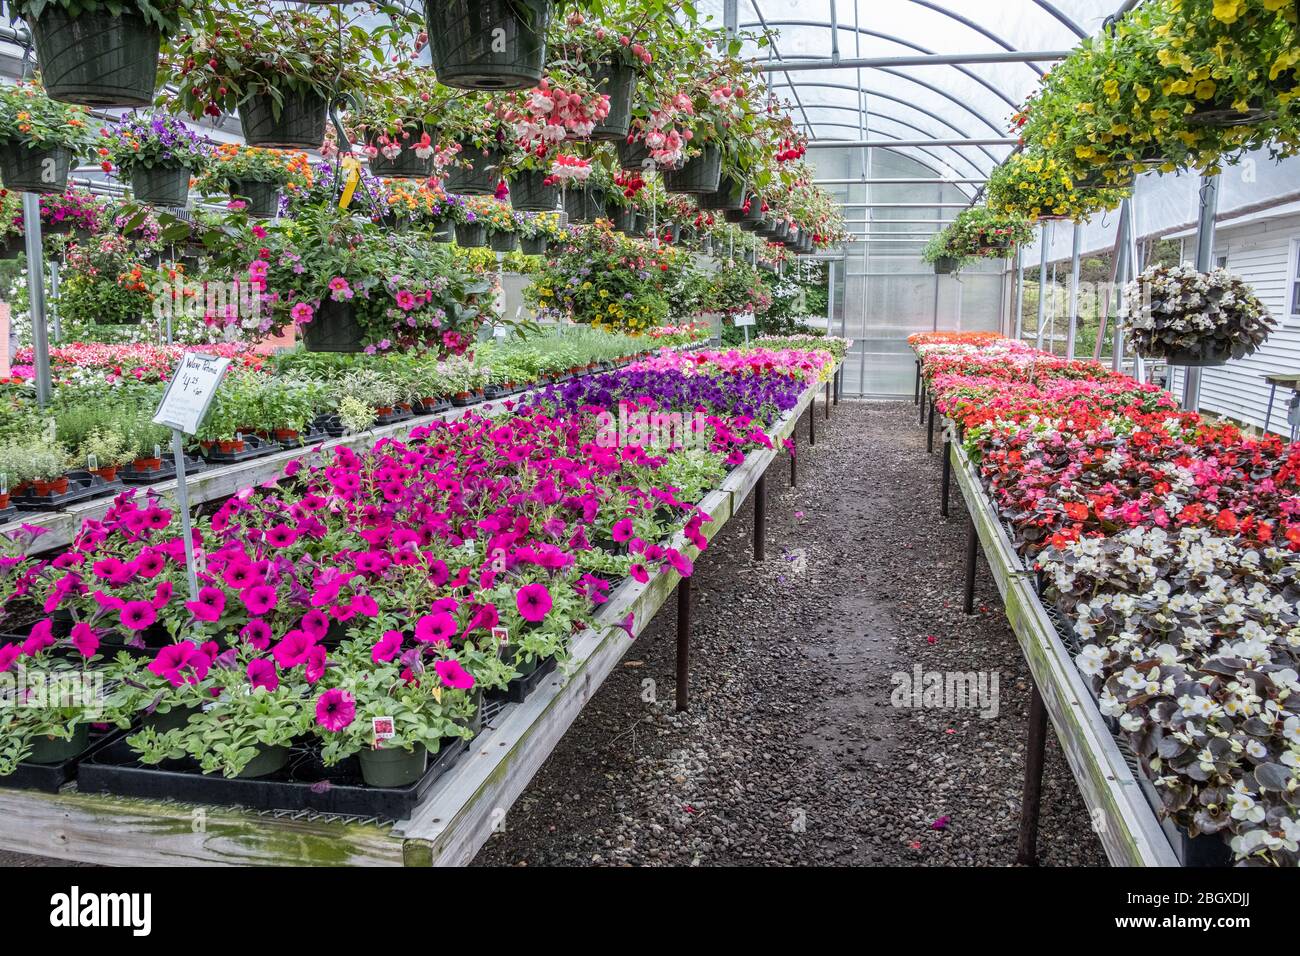 A greenhouse with a large variety of cultivated plants Stock Photo